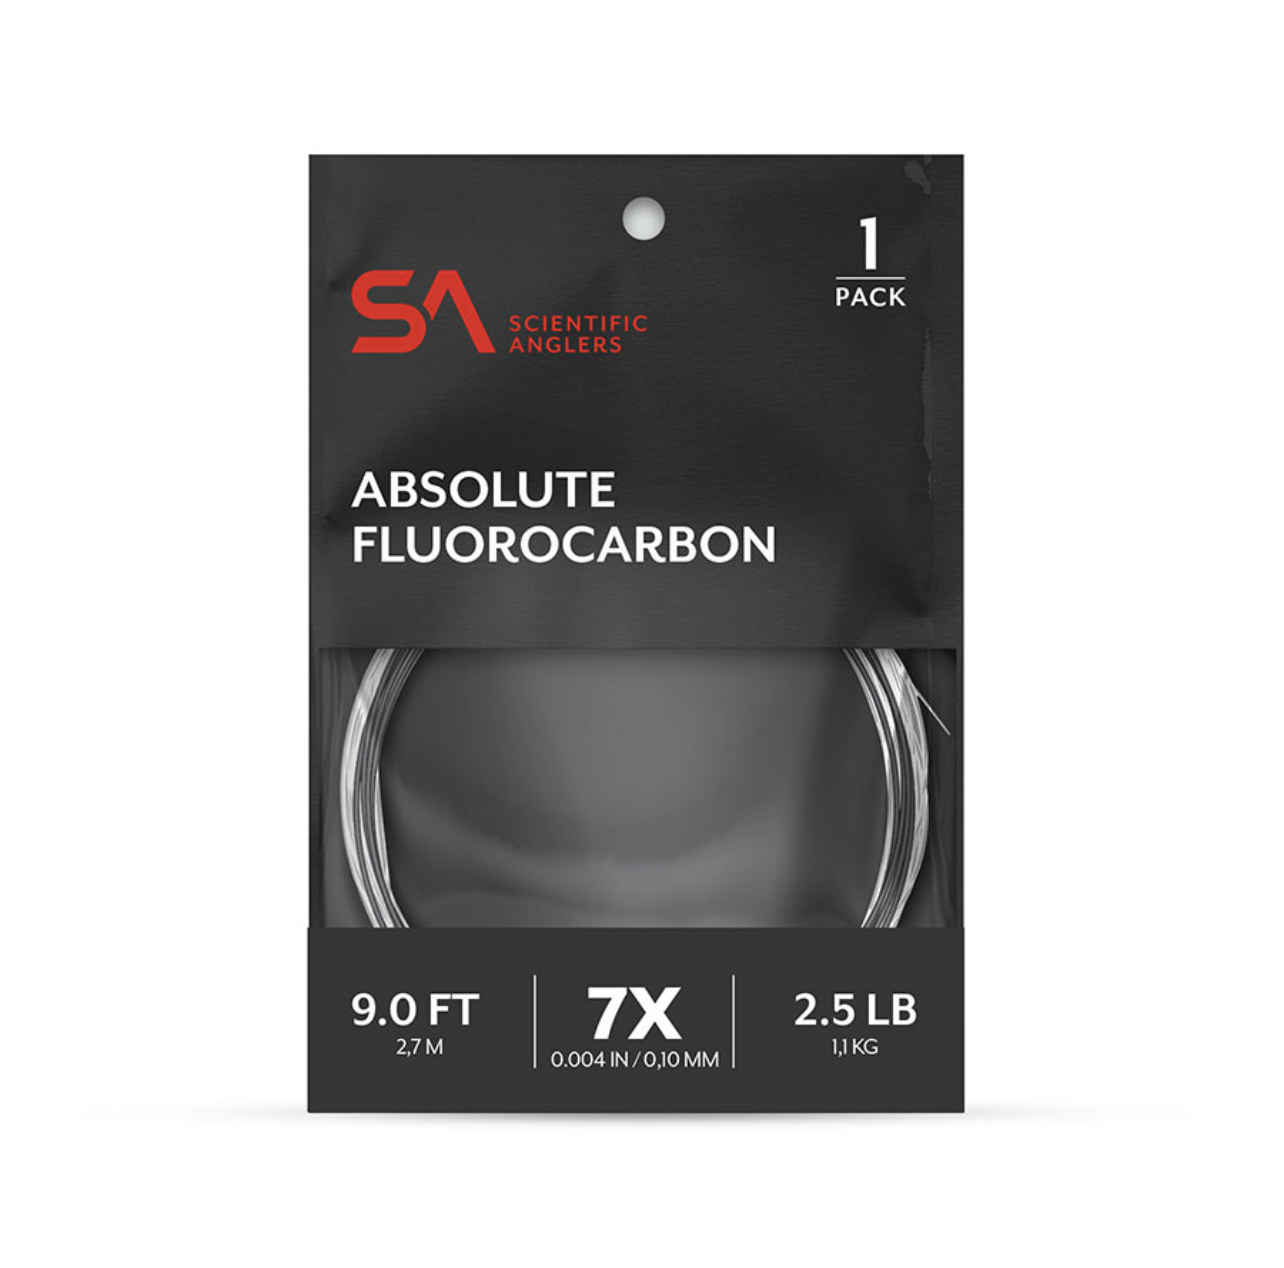 Scientific Anglers Absolute Fluorocarbon Leader - 12ft - 10lb